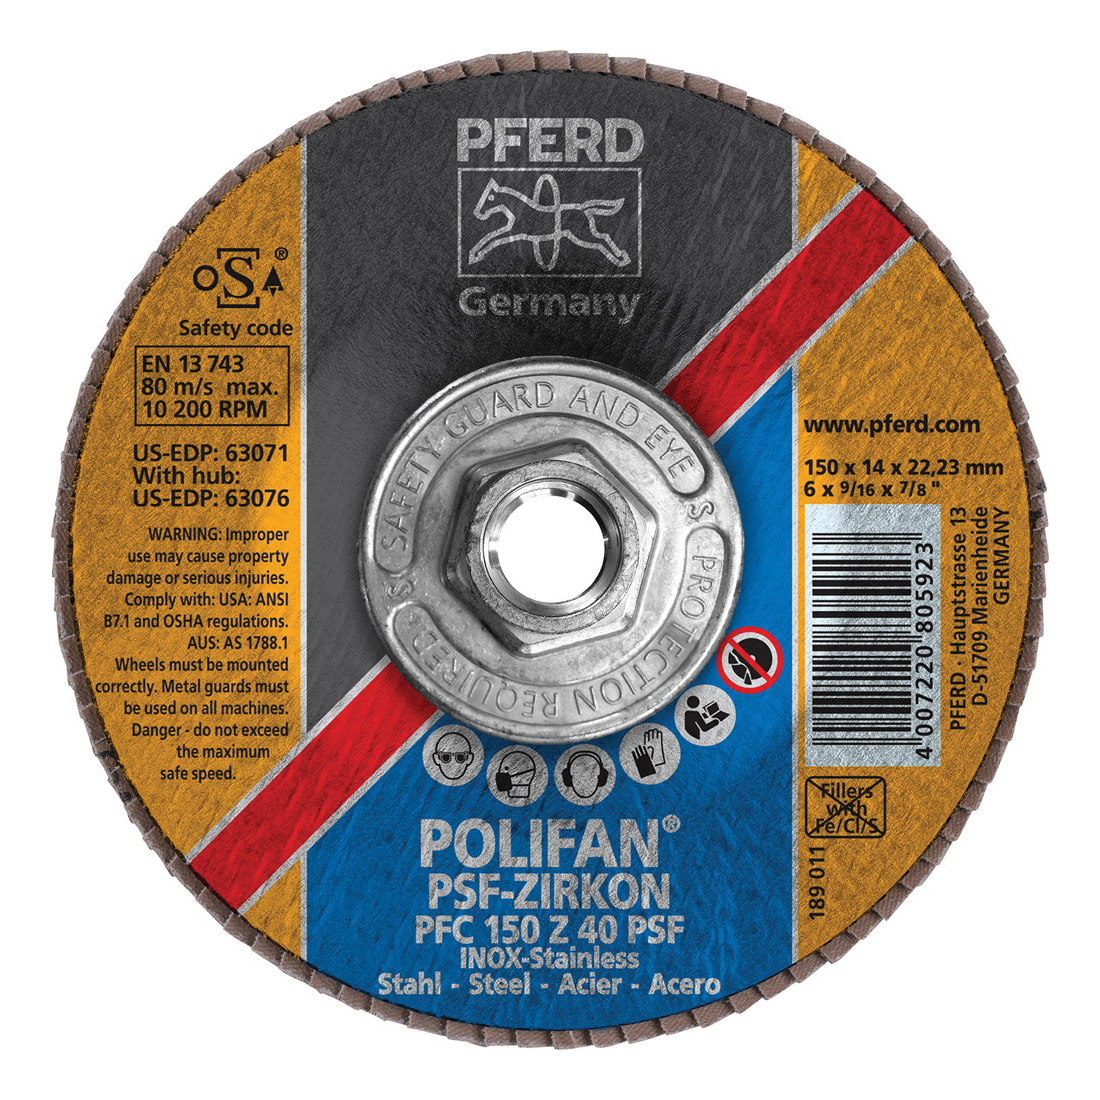 PFERD Polifan® 63076 Universal Line PSF-Z Threaded Coated Abrasive Flap Disc, 6 in Dia, 40 Grit, Zirconia Alumina Abrasive, Type 29 Conical Disc